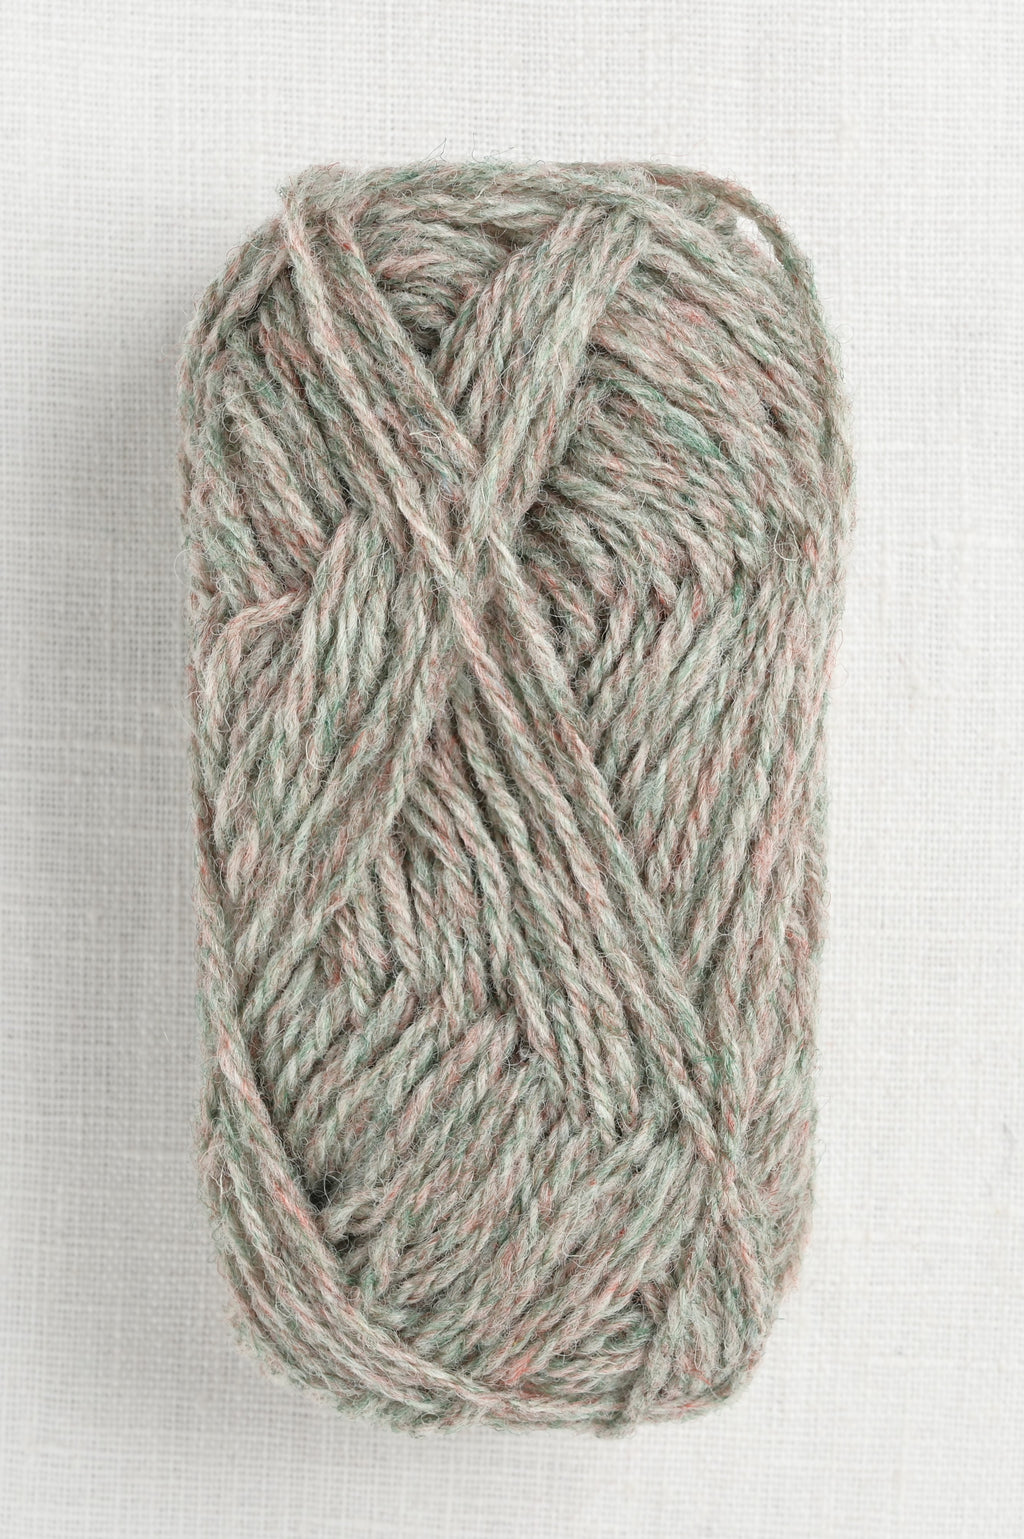 Knitting and Crochet - Lace and Fingering Weight - metallic yarn